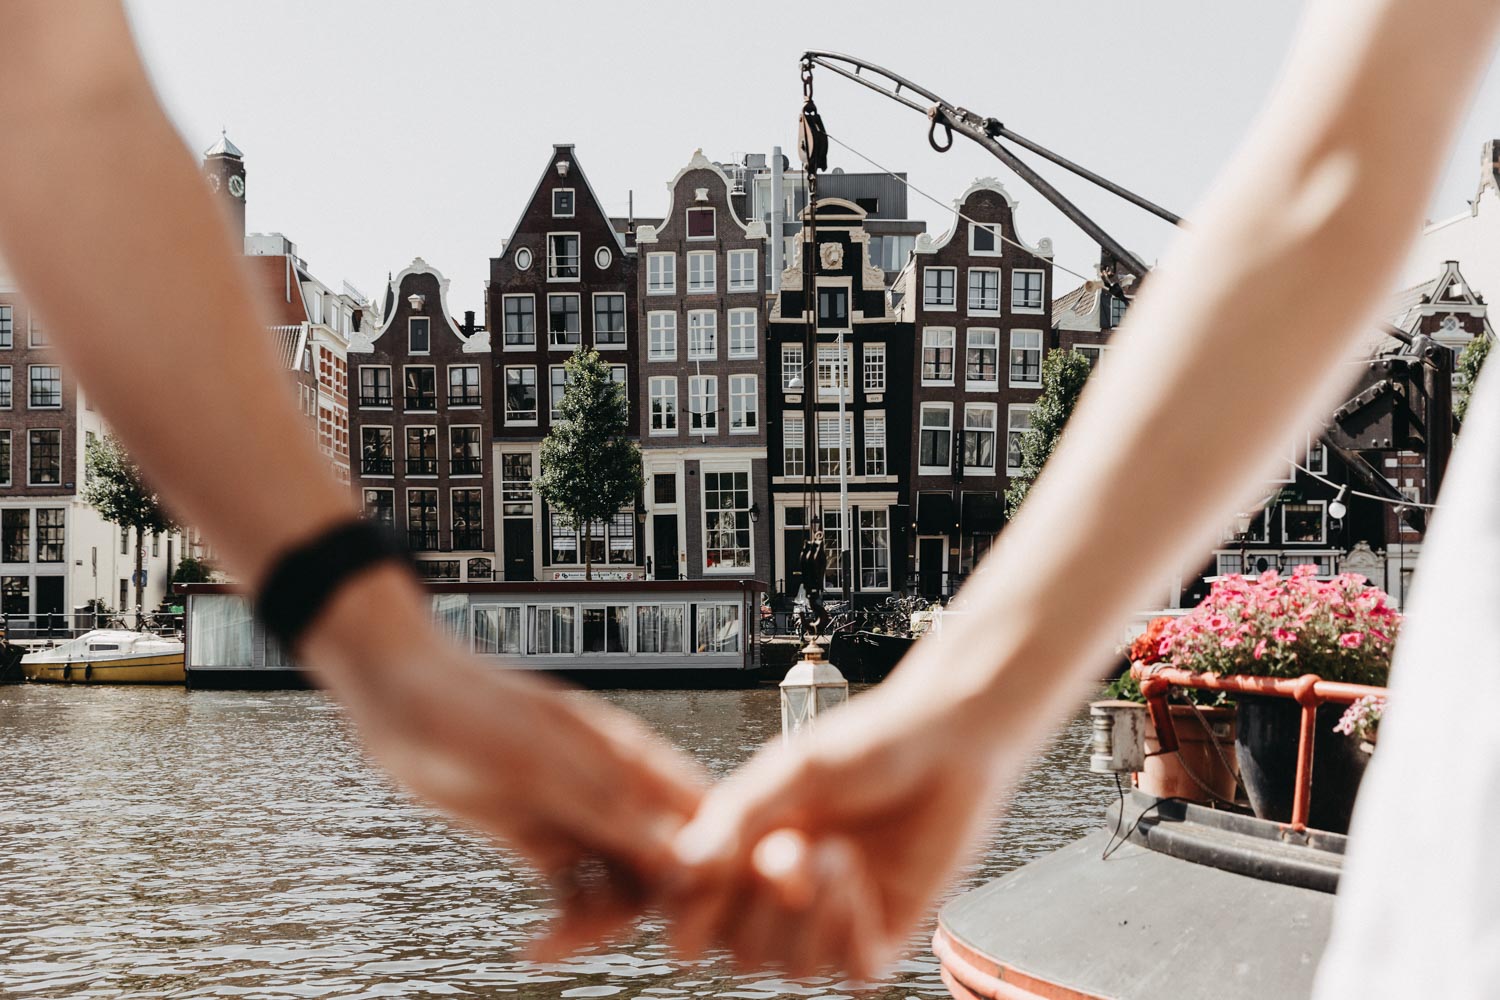 Hands holding each other while the couple photoshoot in Amsterdam